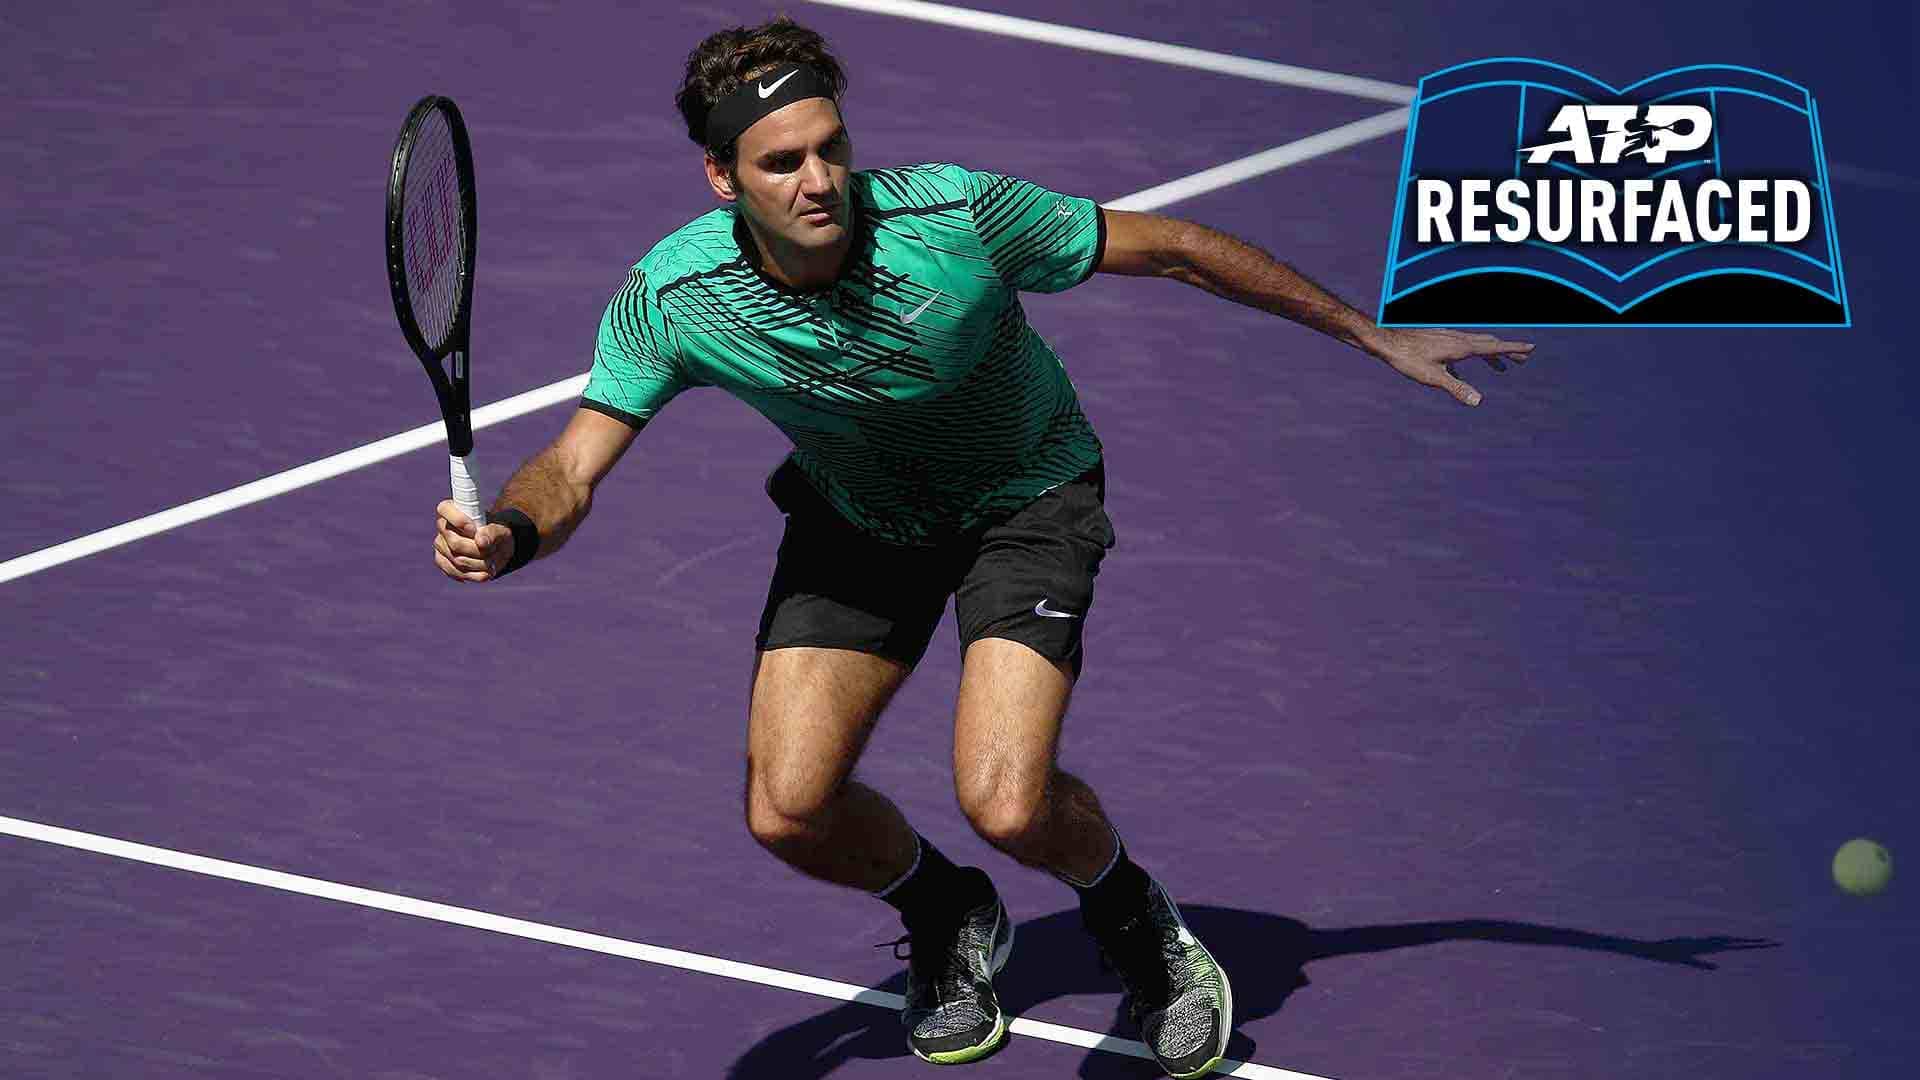 Roger Federer saves two match points against Tomas Berdych to reach the Miami Open presented by Itau semi-finals.